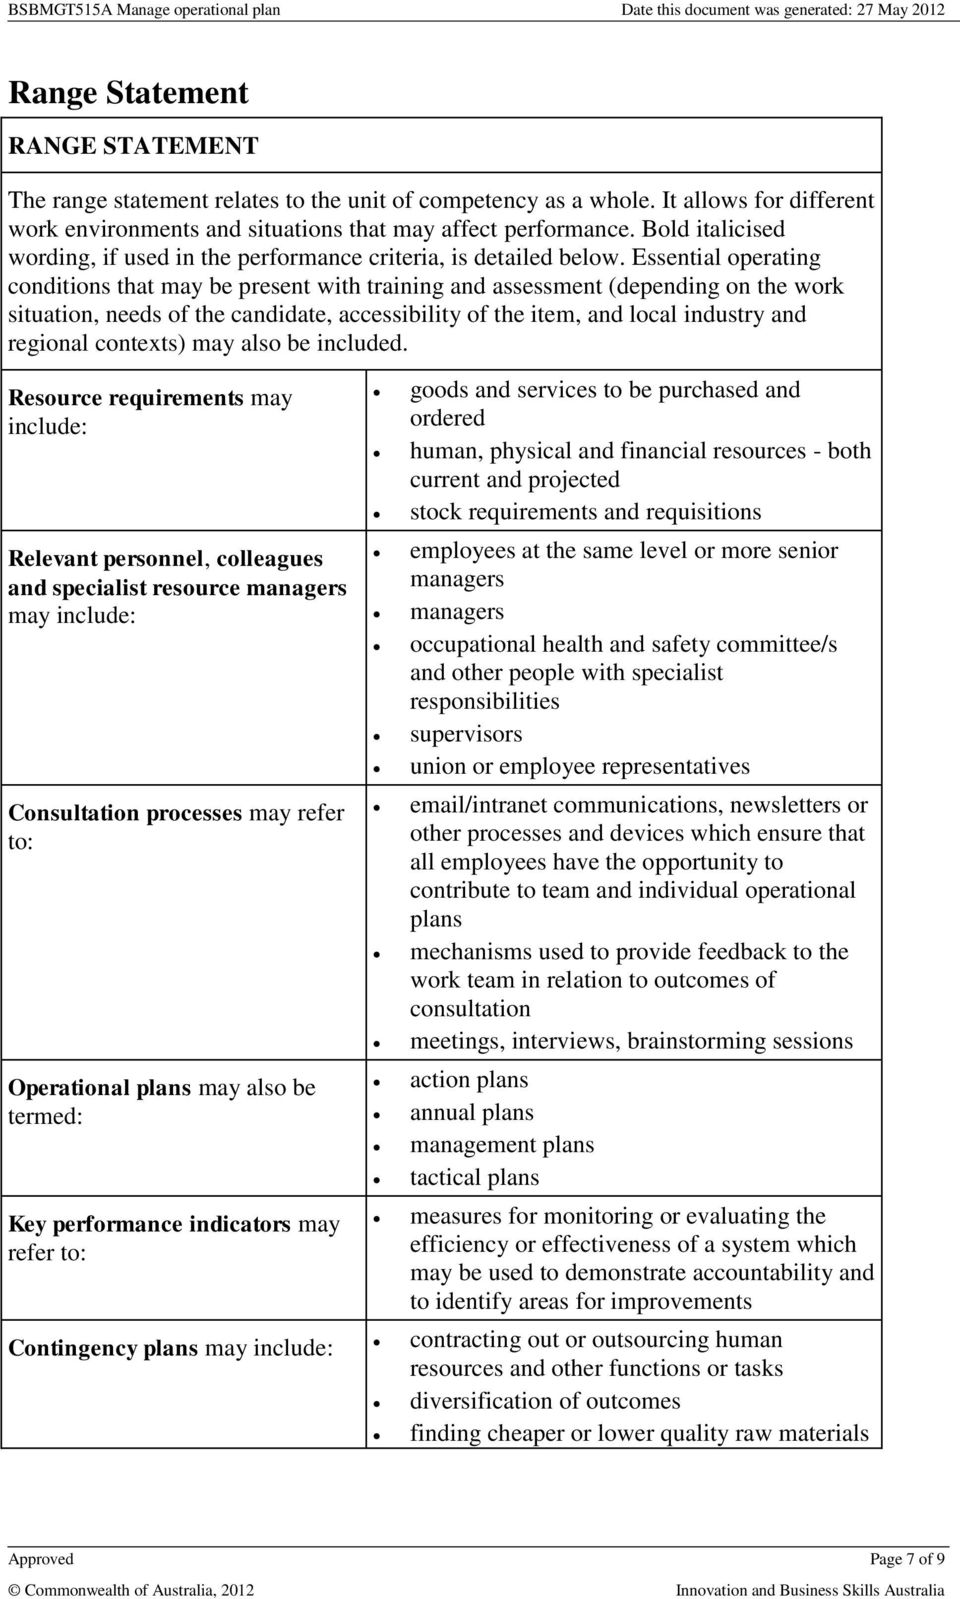 Essential operating conditions that may be present with training and assessment (depending on the work situation, needs of the candidate, accessibility of the item, and local industry and regional